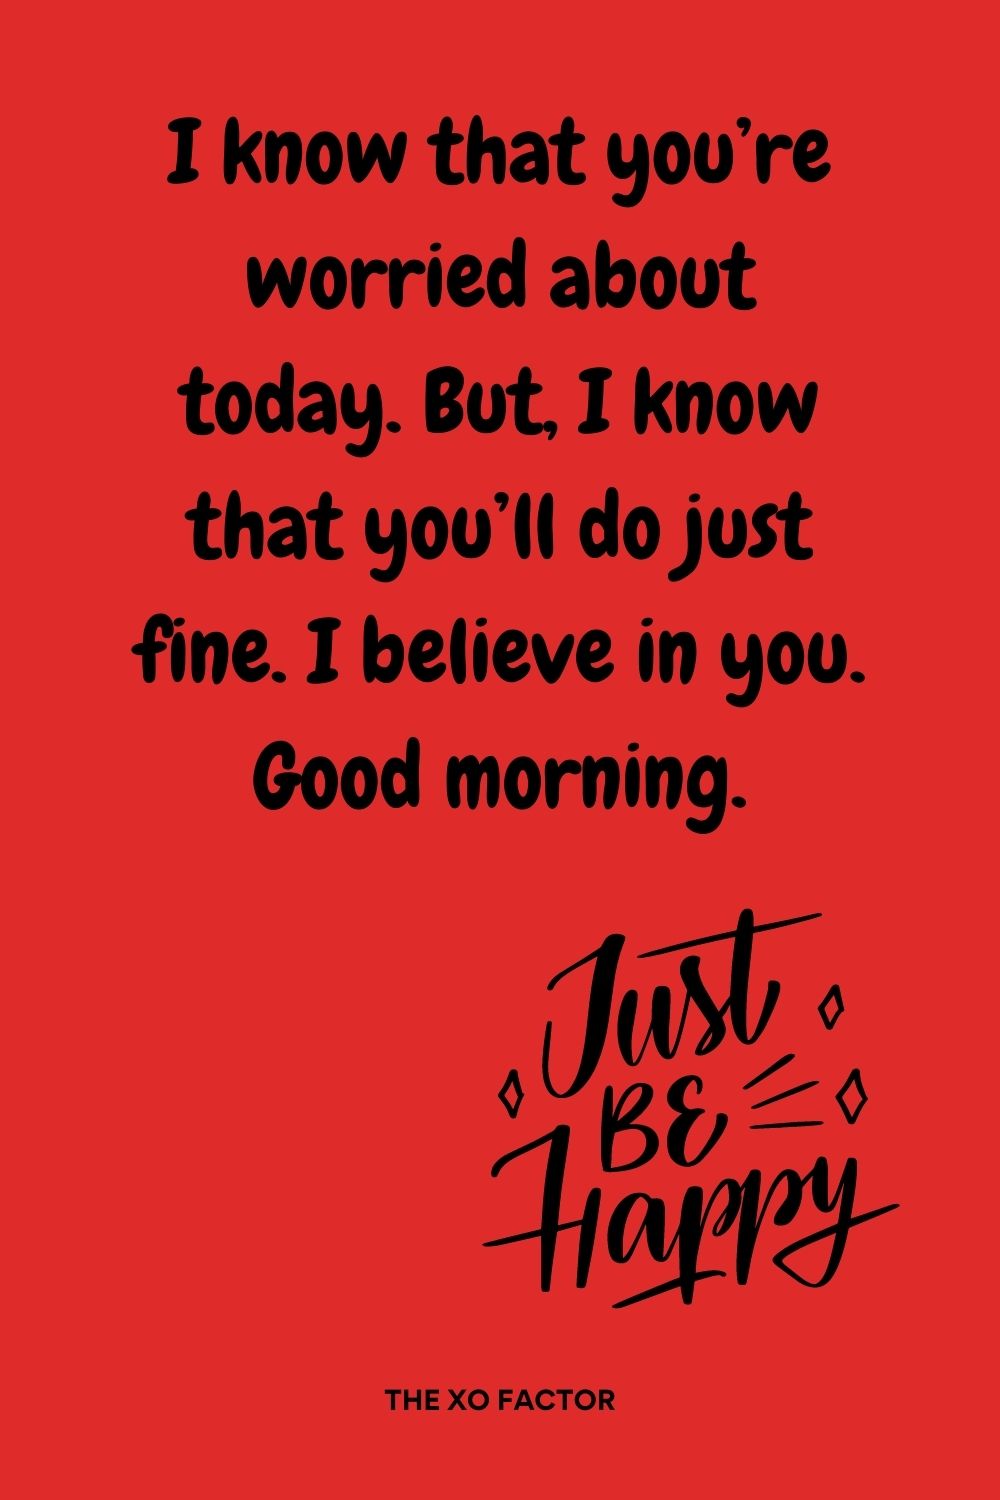 I know that you’re worried about today. But, I know that you’ll do just fine. I believe in you. Good morning.